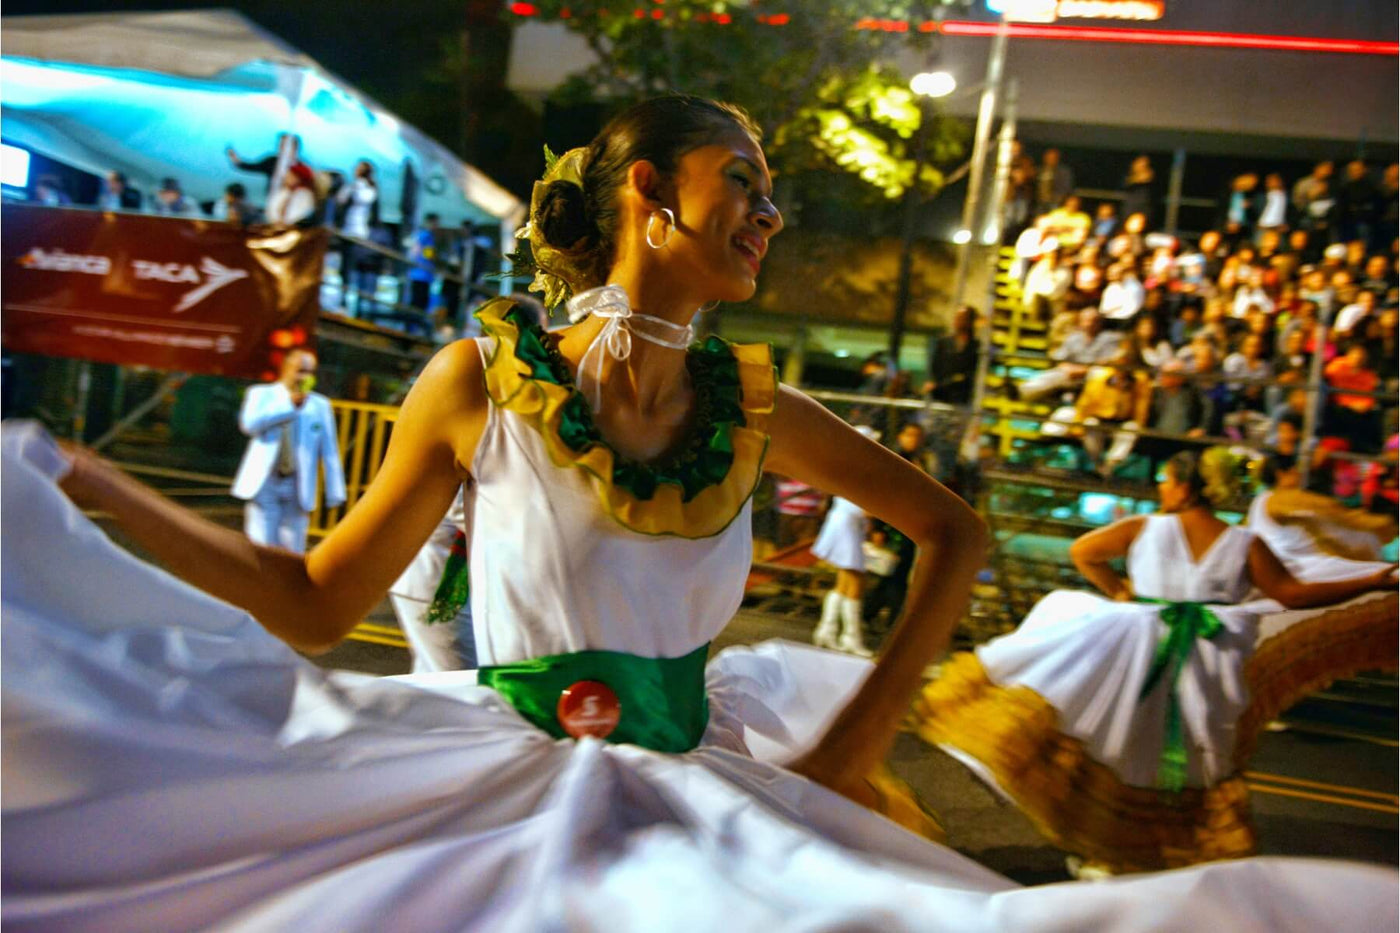 Latin American woman wearing a white dress with green embellishments, dancing as part of a show